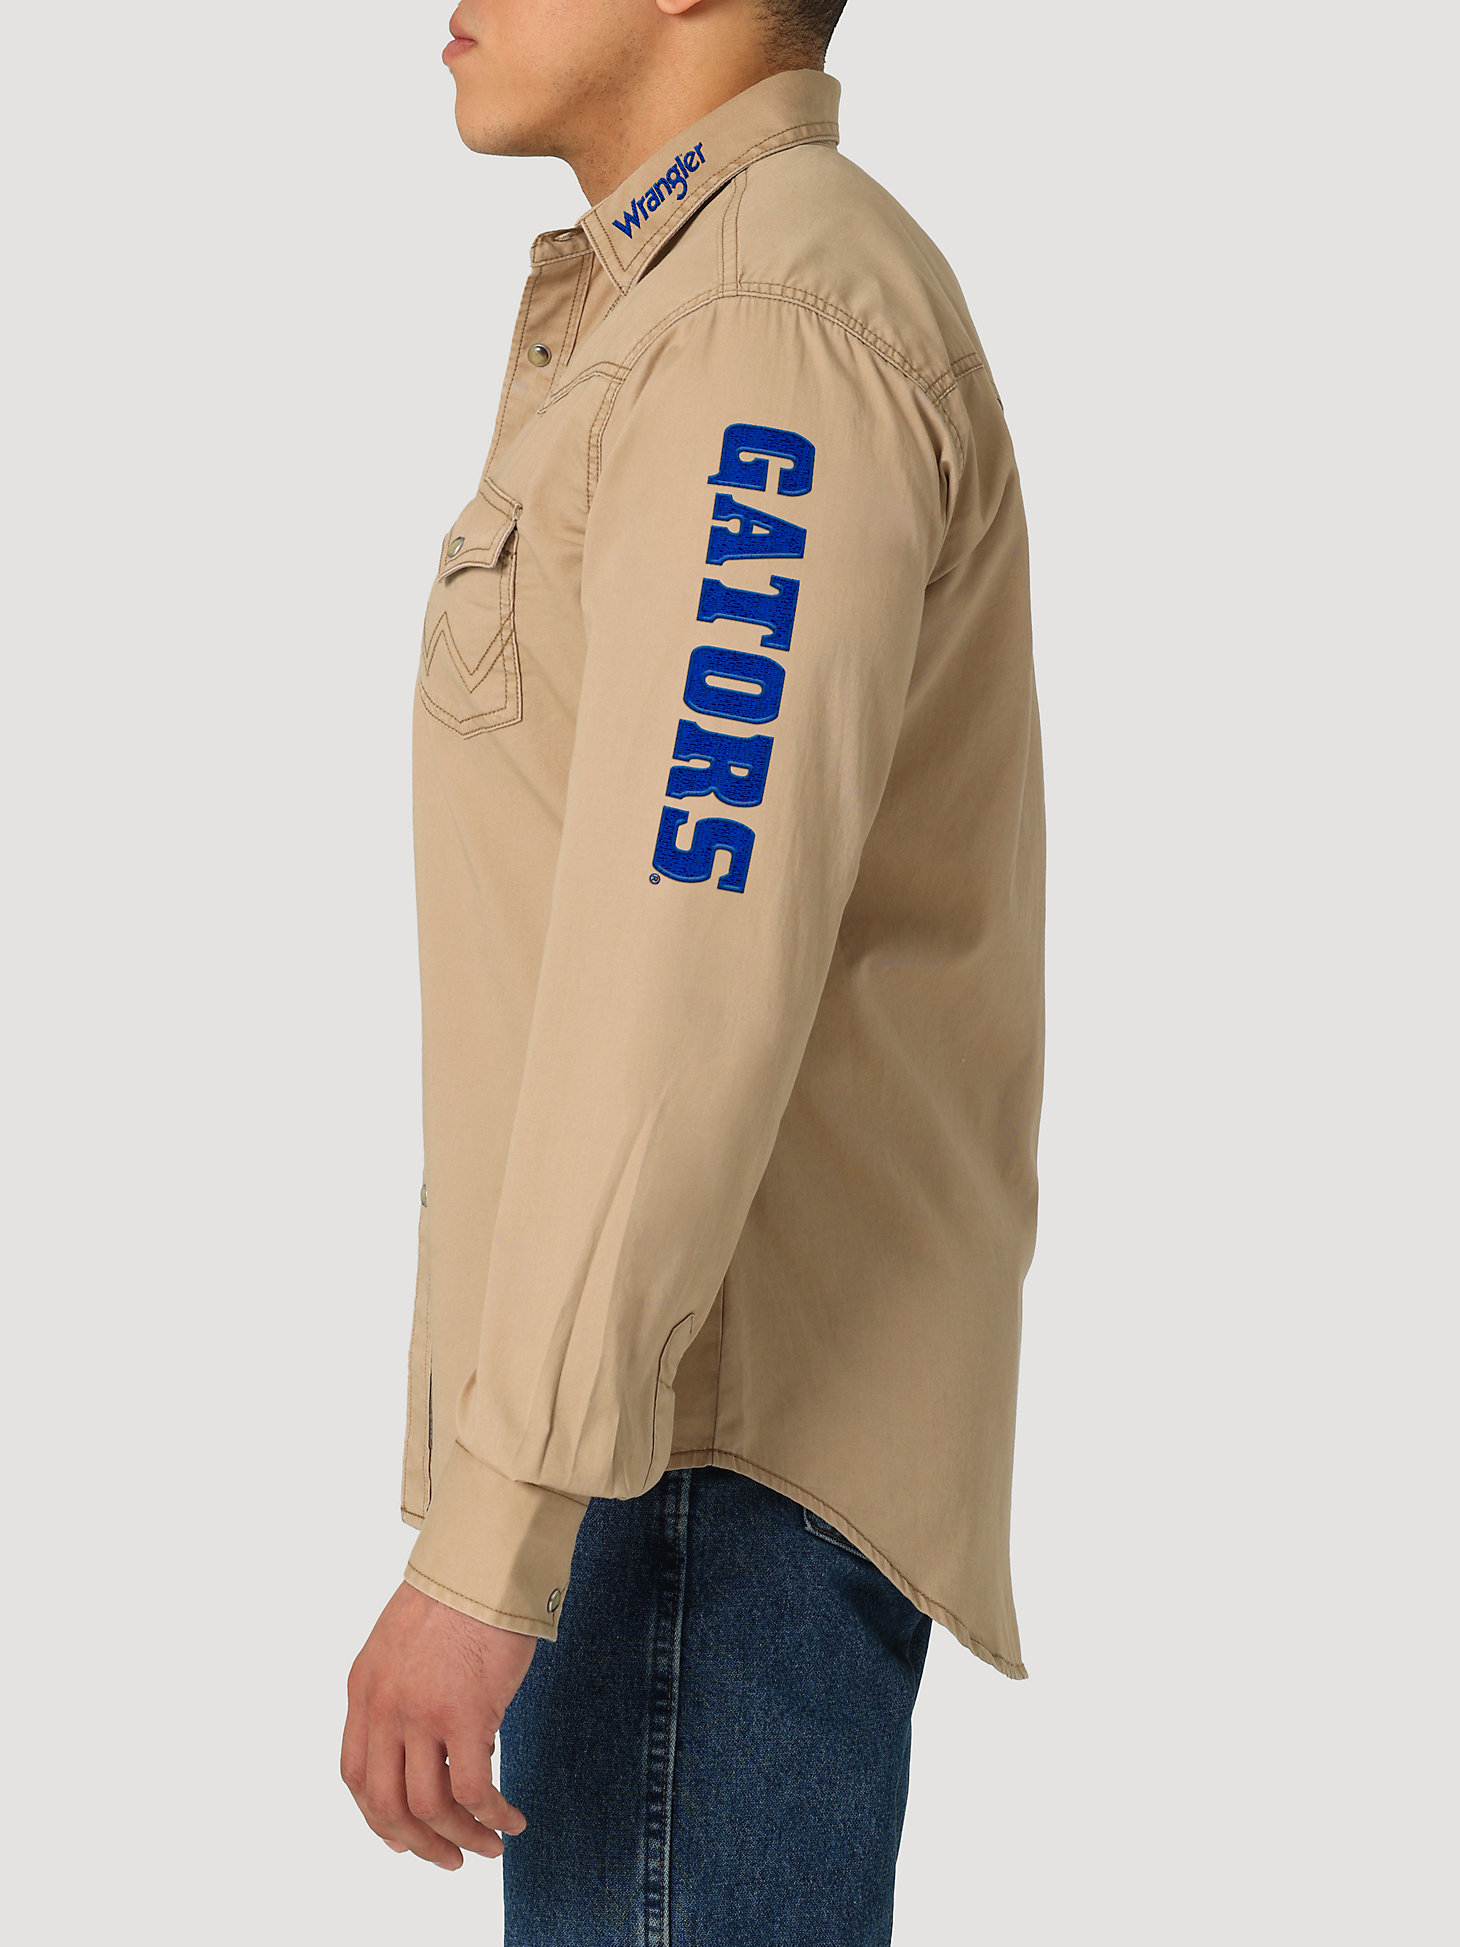 Wrangler Collegiate Embroidered Twill Western Snap Shirt in University of Florida alternative view 3